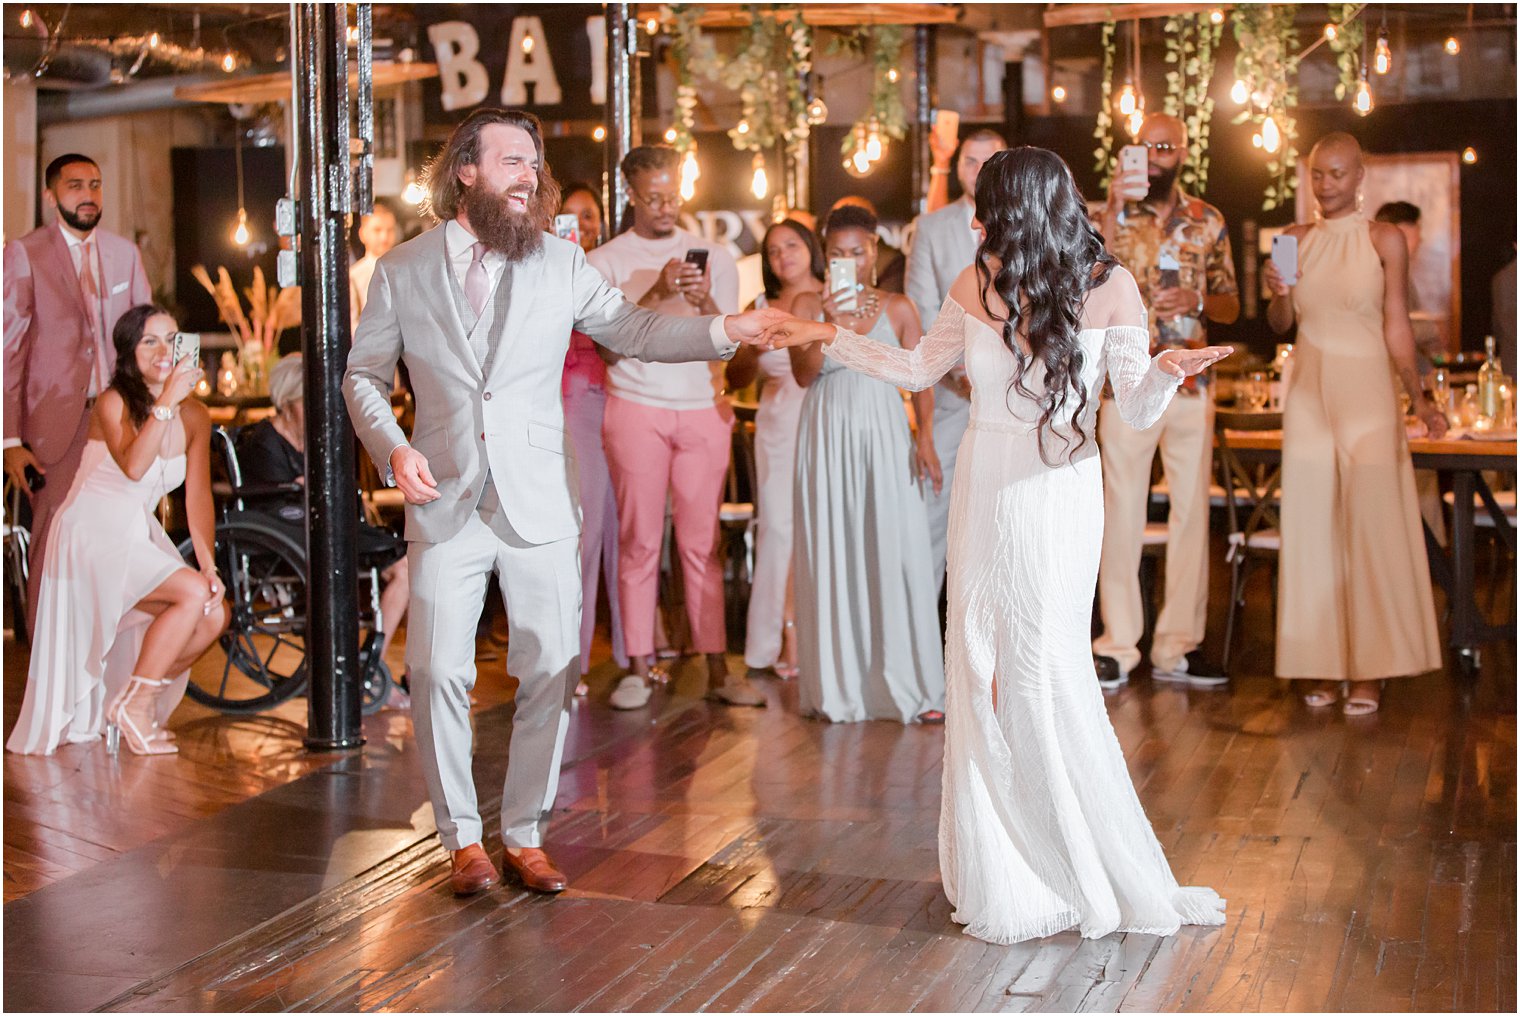 Reception dancing photos for industrial chic wedding at Art Factory Studios in Paterson NJ